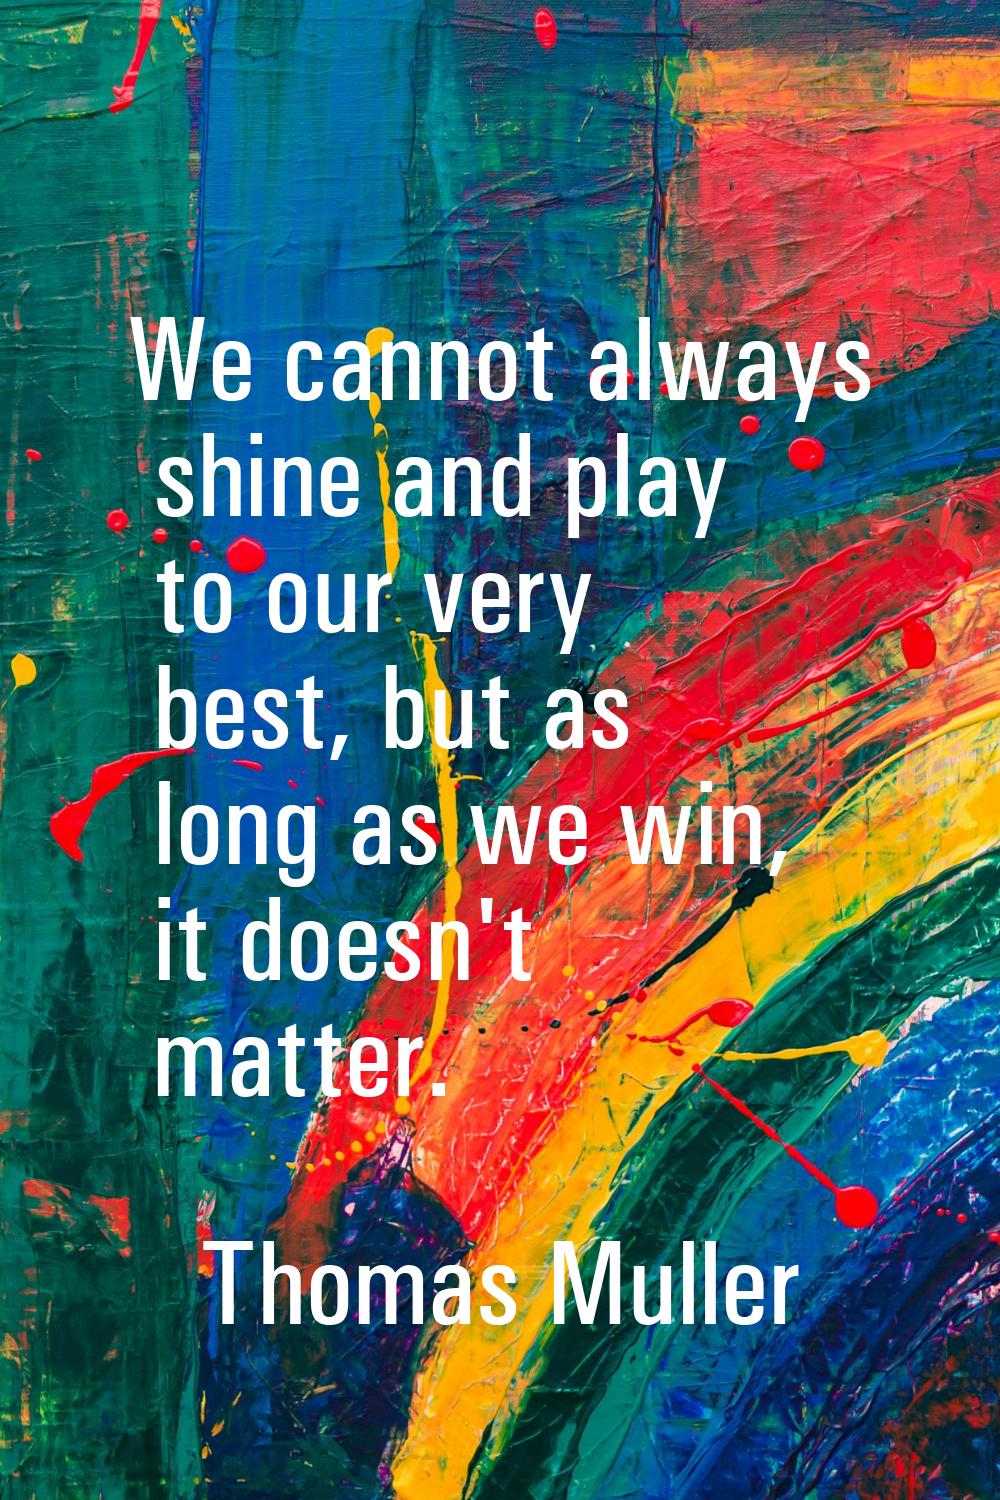 We cannot always shine and play to our very best, but as long as we win, it doesn't matter.